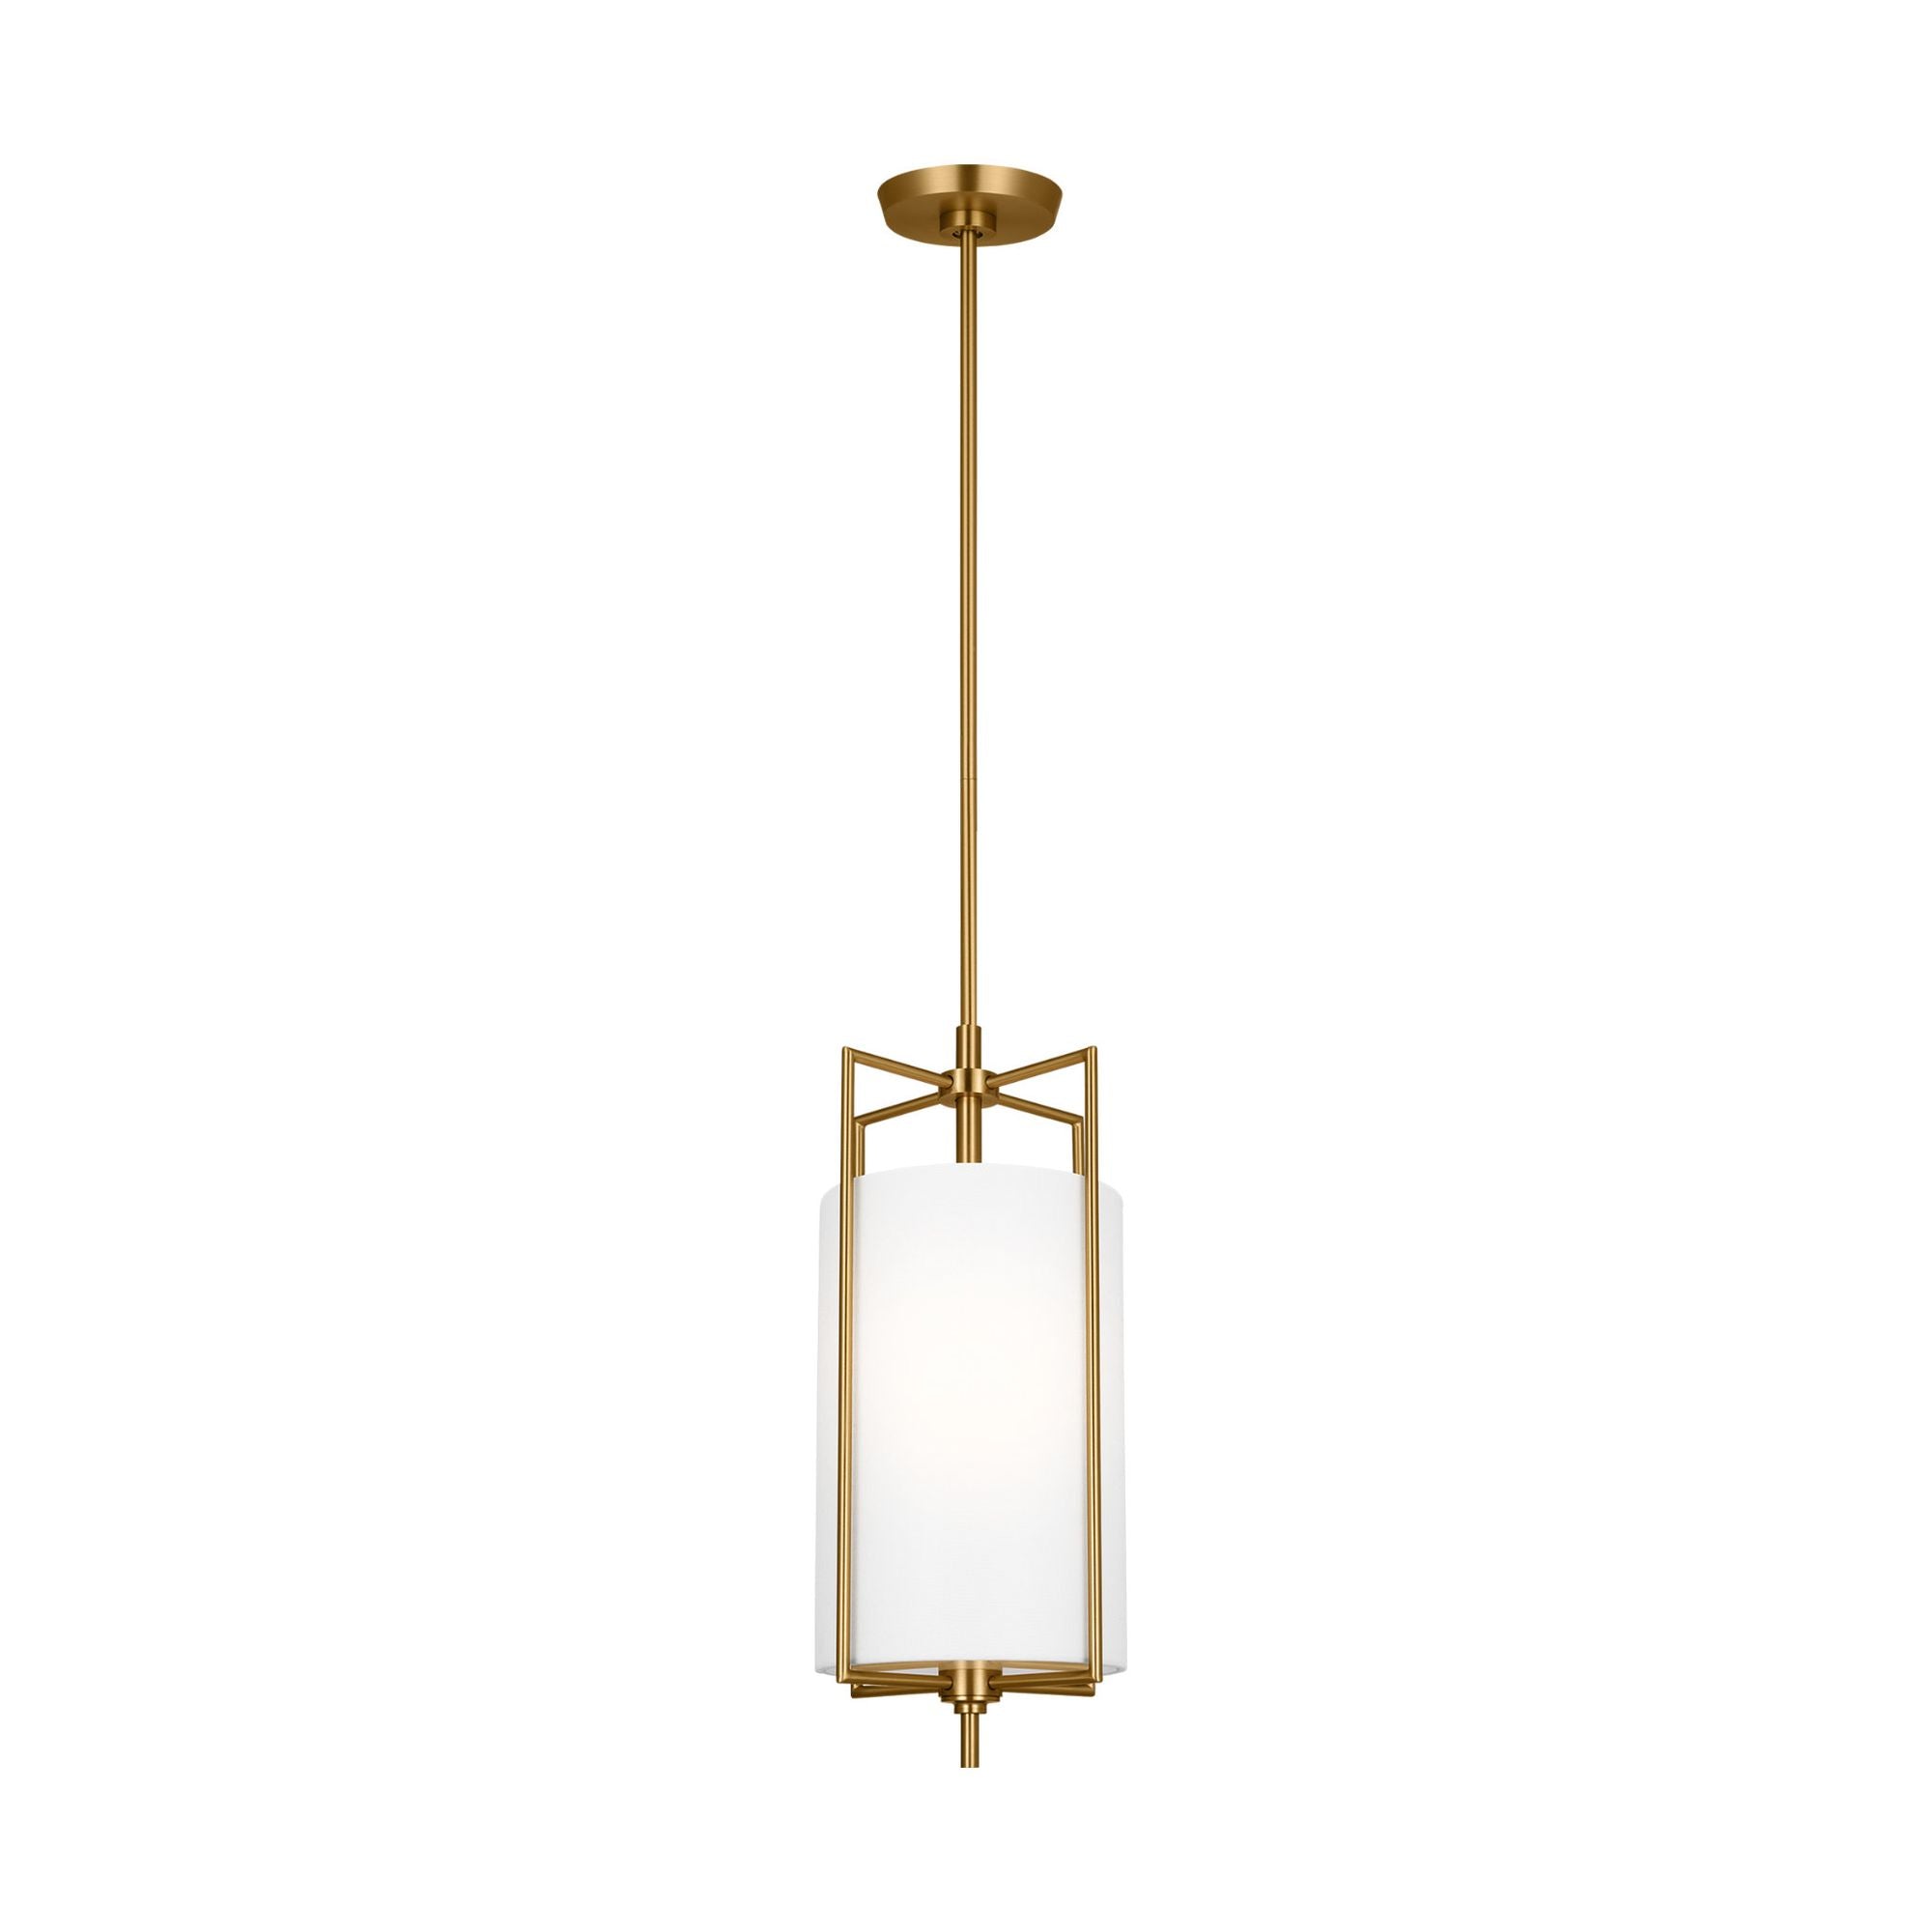 Chapman & Myers Perno Small Hanging Shade in Burnished Brass